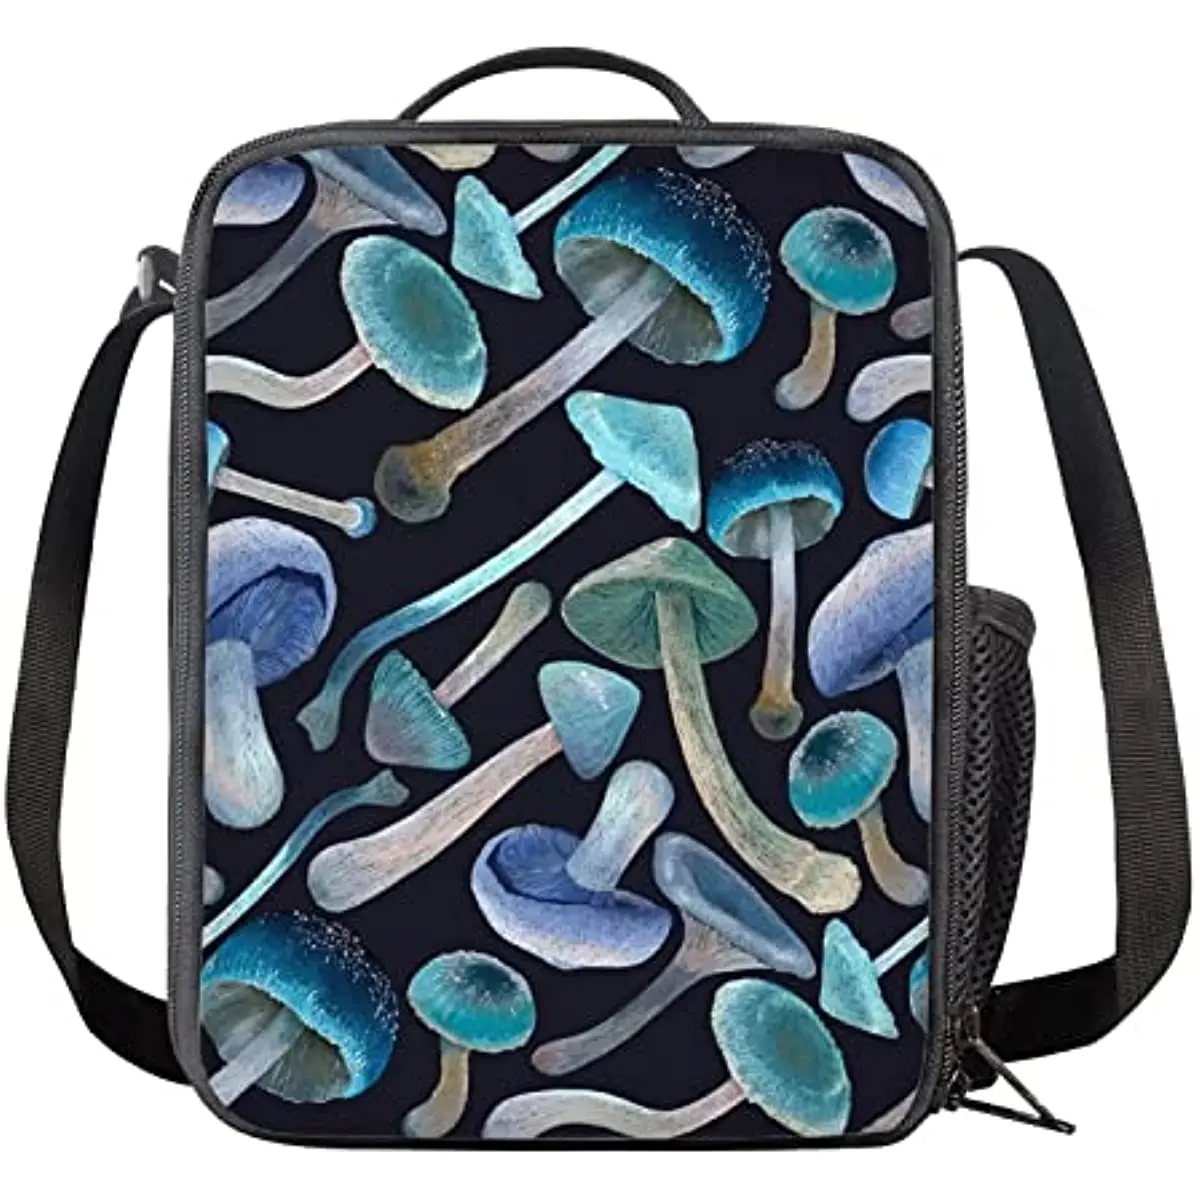 Blue Mushroom Print Kids Lunch Bags Insulated Cooler Lunch Totes Portable Reusable Lunch Box Holders for Kids Boys Girls Lunch